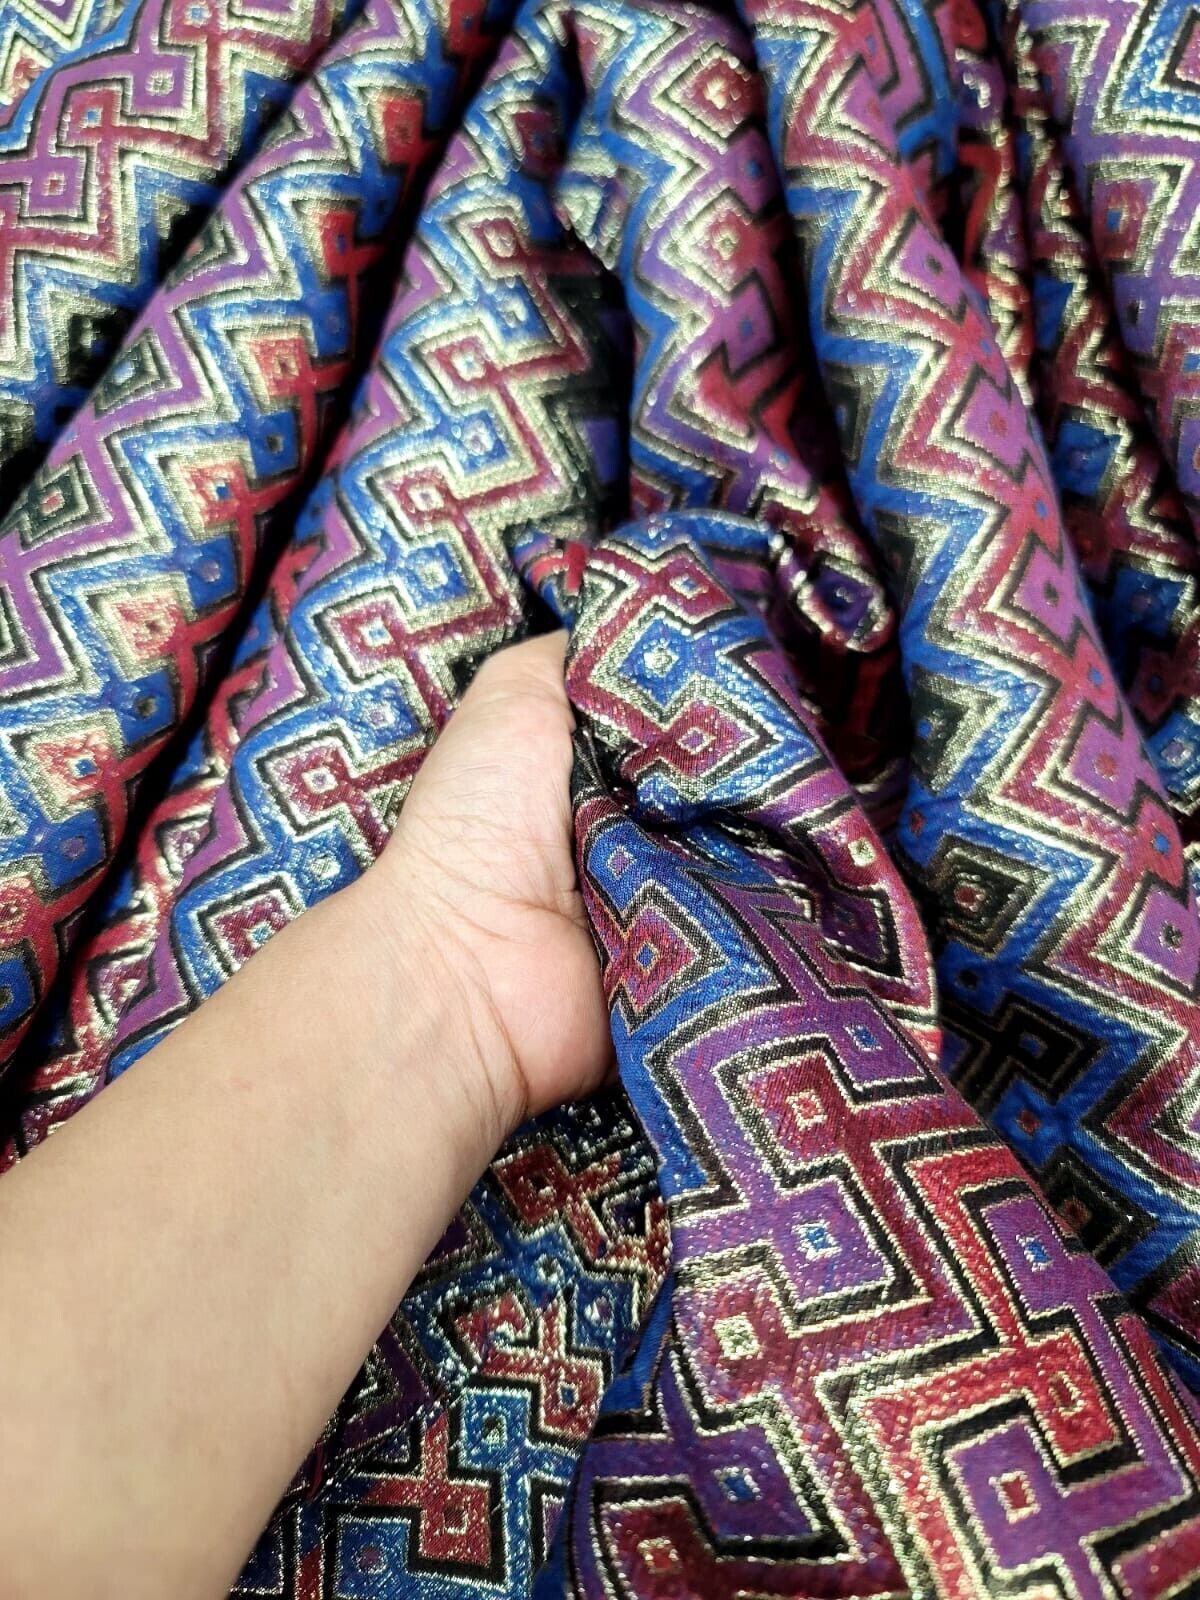 Opulent Red and Gold Geometric Brocade Fabric - Sold by Yard - Perfect for Dressmaking, Upholstery, and High-End Creations